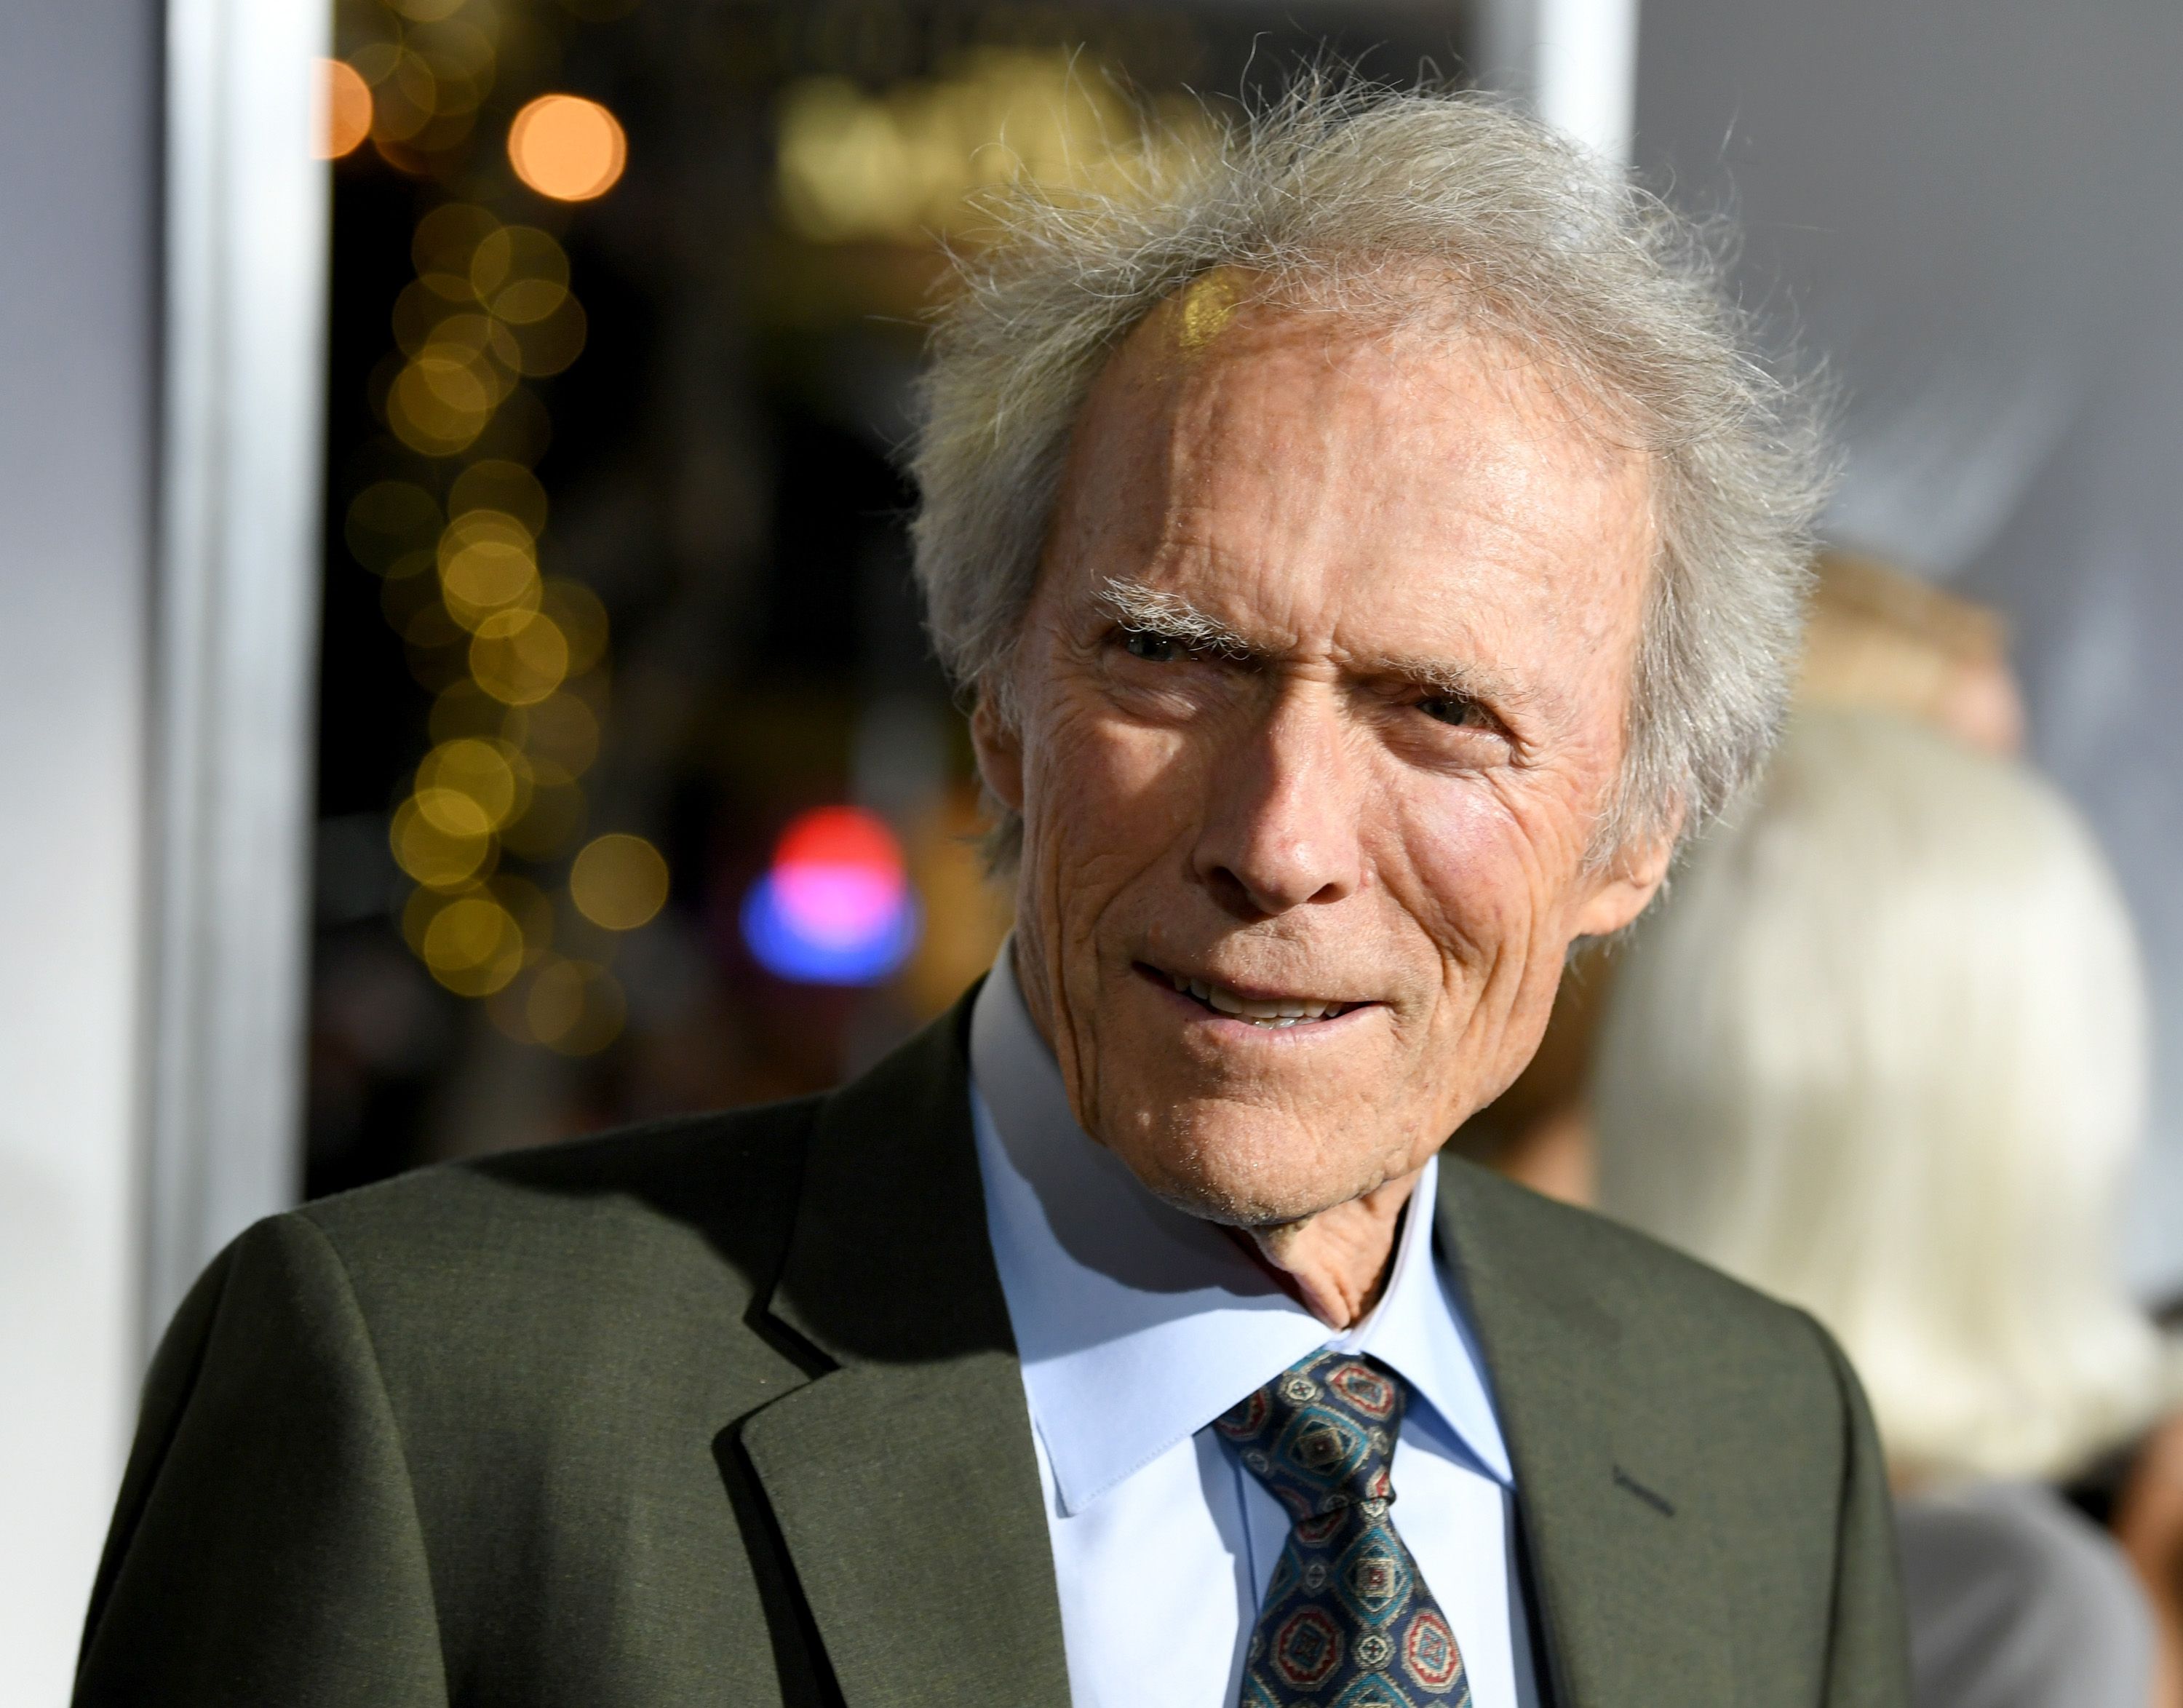 Clint Eastwood at the premiere of Warner Bros. Pictures' "The Mule" at the Village Theatre in Los Angeles, California | Photo: Kevin Winter/Getty Images